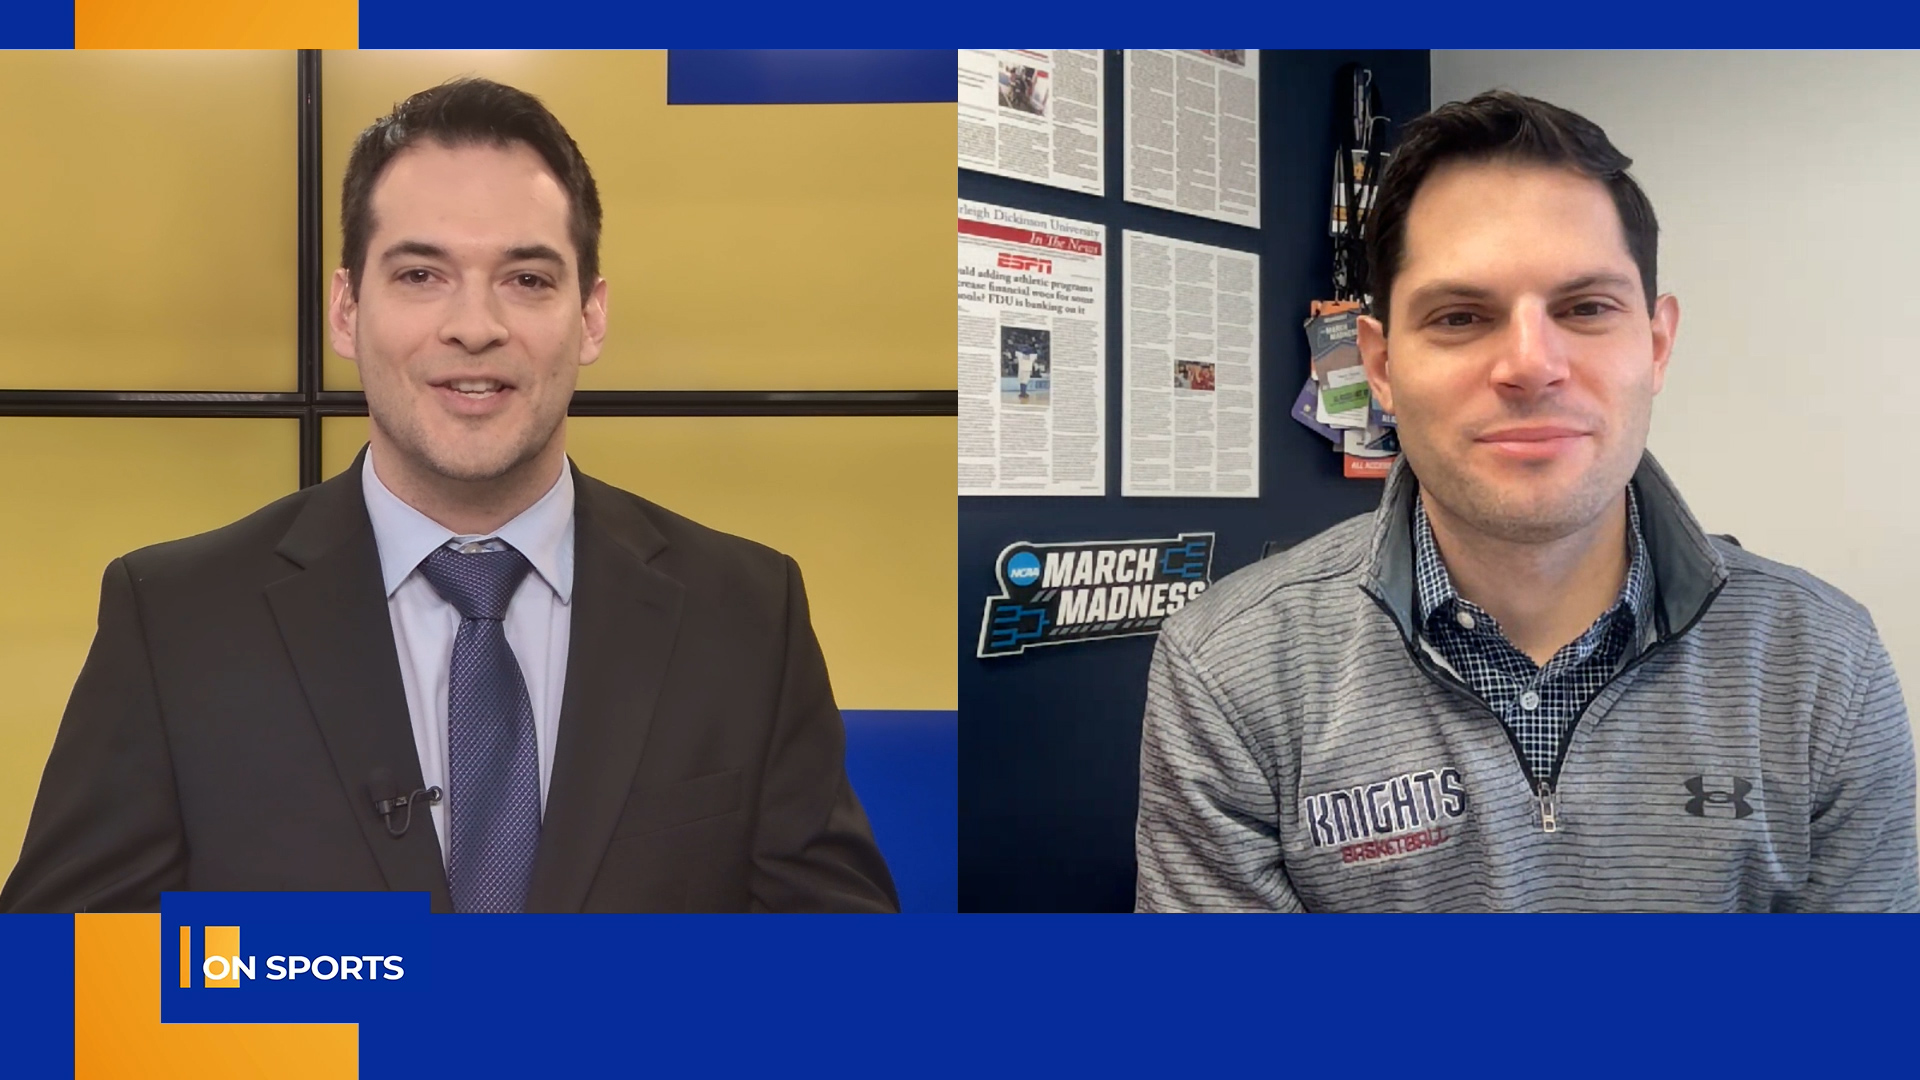 On Sports – FDU’s Sports Arena is Renamed, Interview with Jason Young